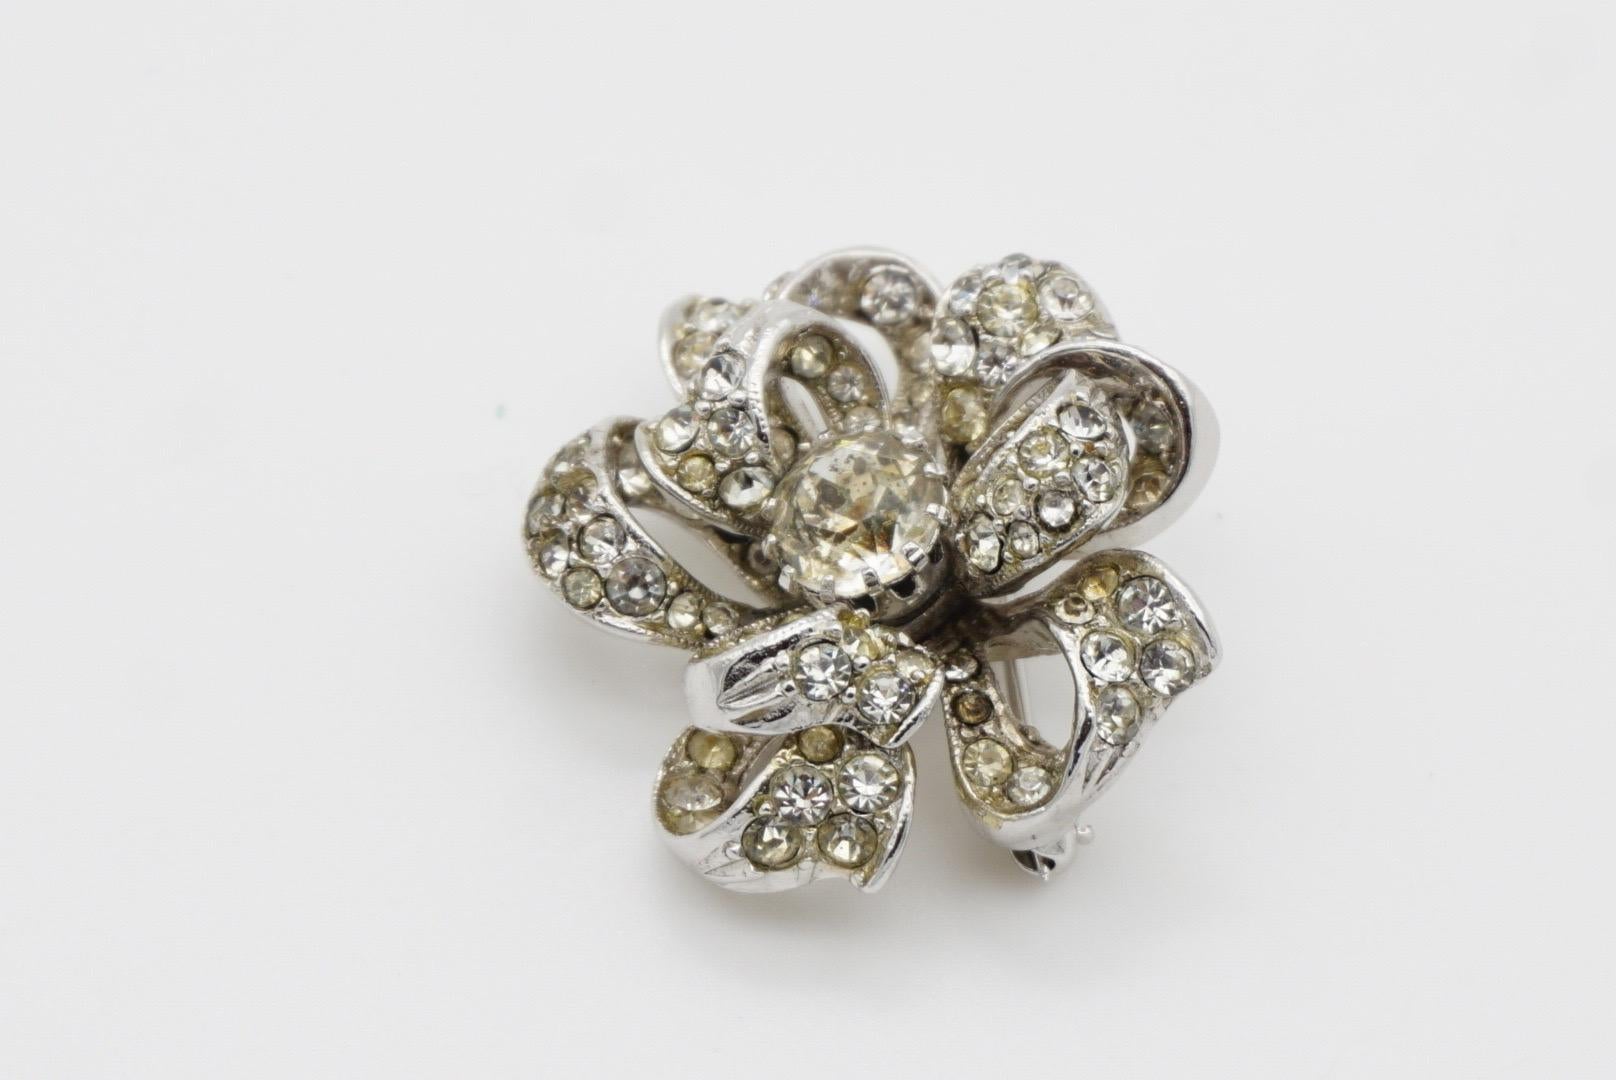 Christian Dior by Mitchel Maer for Christian Dior for Christian Dior for Christian Dior for Christian Dior by Mitchel Maer for Christian Dior for Christian Dior 1950s Crystals Double Layer Flower Silver Brooch en vente 5